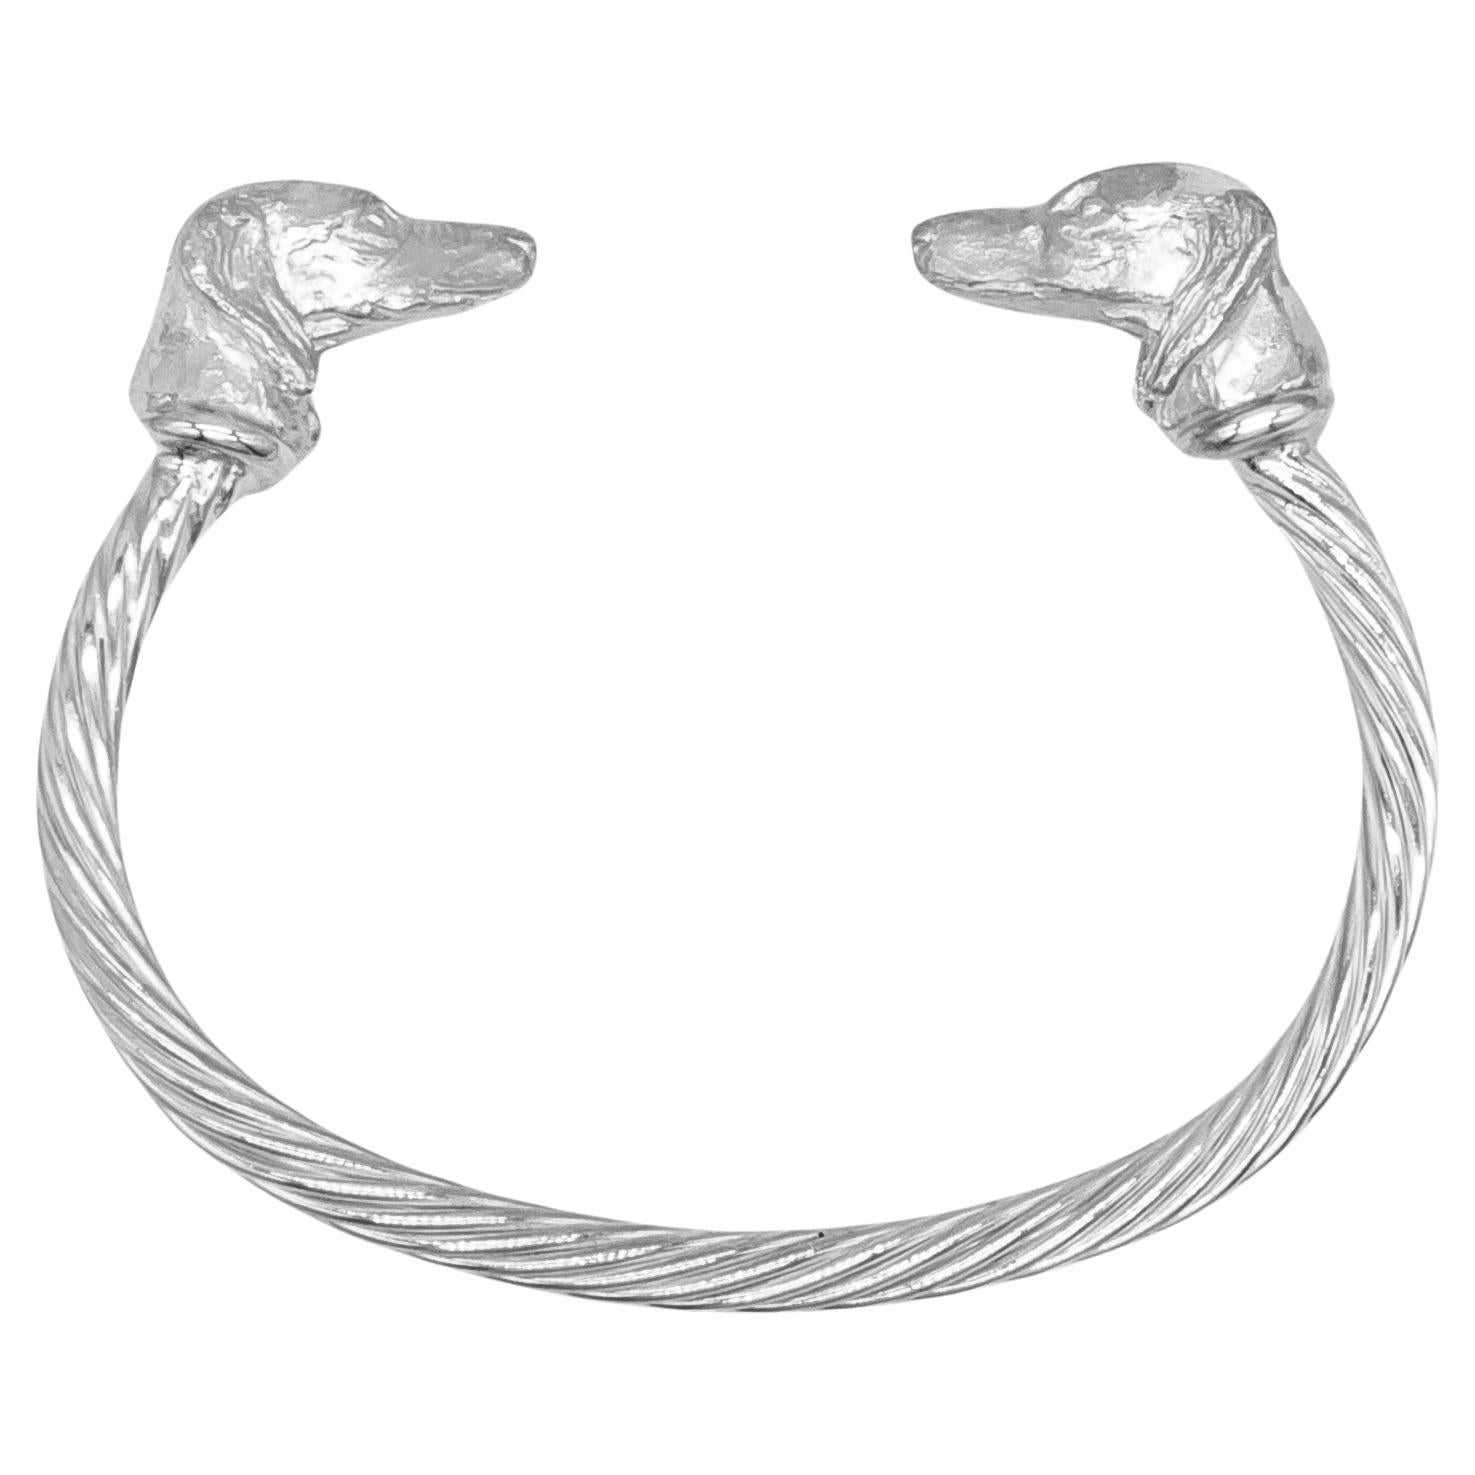 Paul Eaton Sculpted Saluki Dog Heads on Twisted Bangle in Sterling For Sale